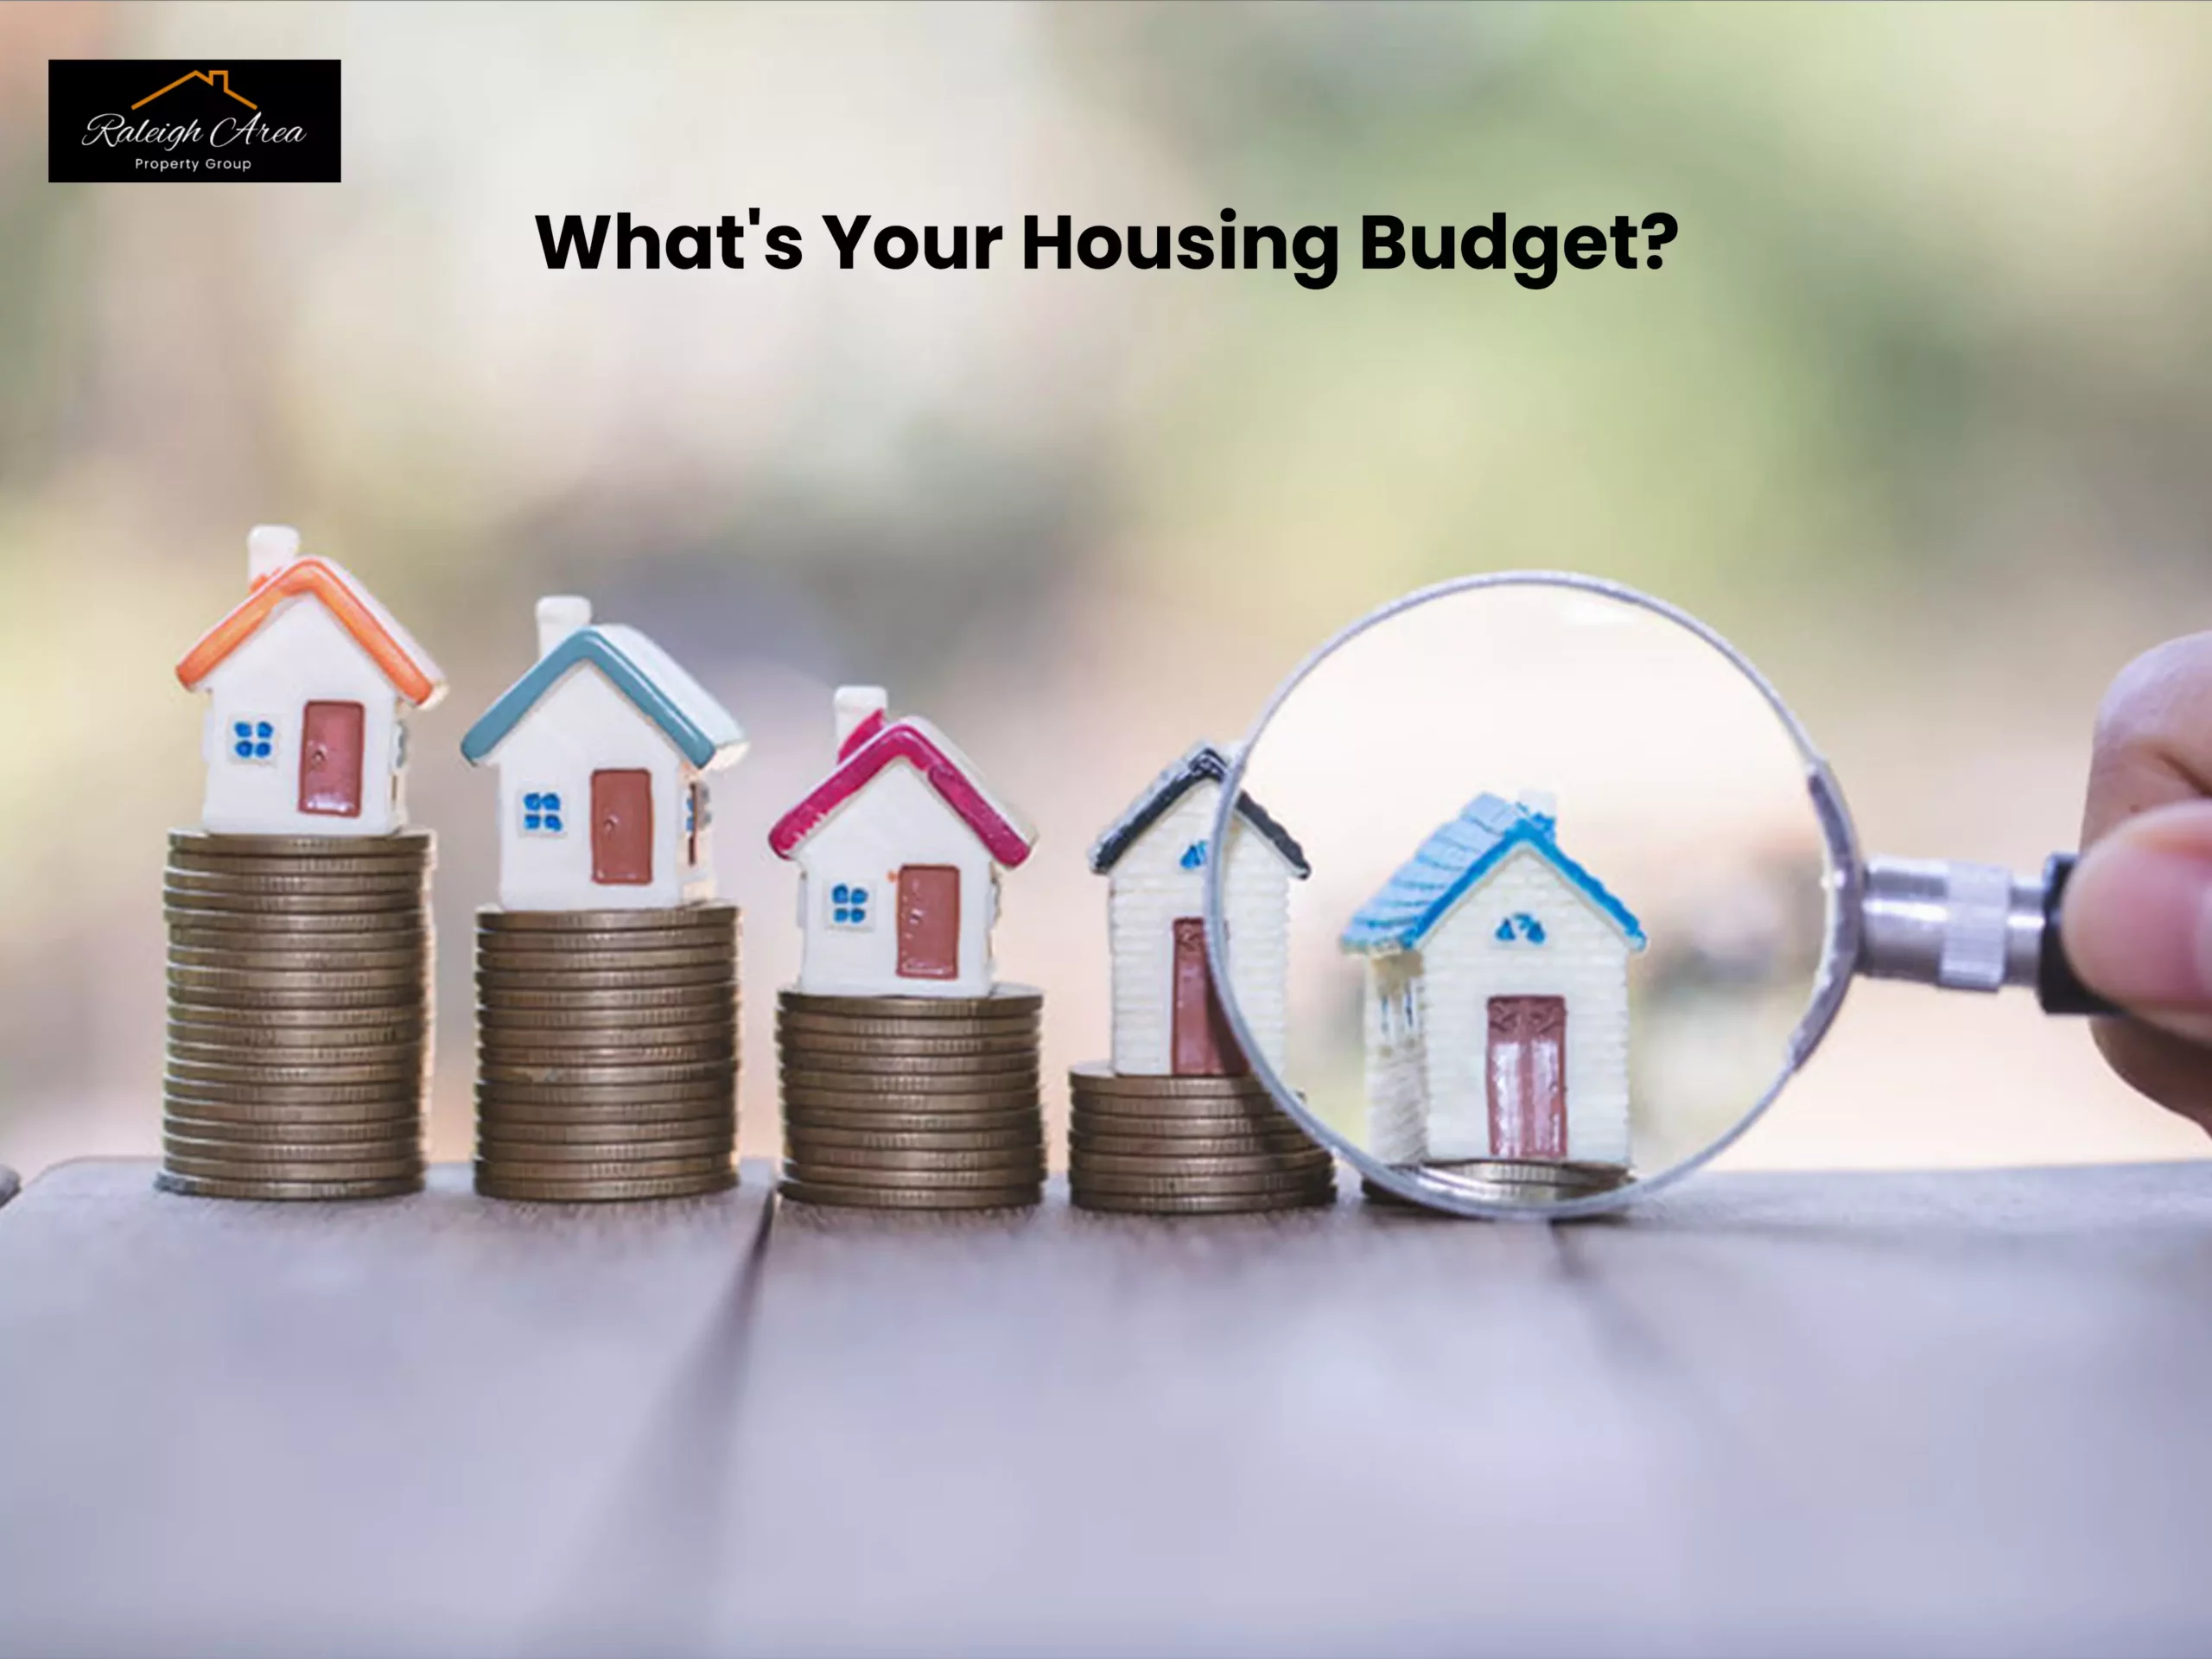 What's Your Housing Budget?